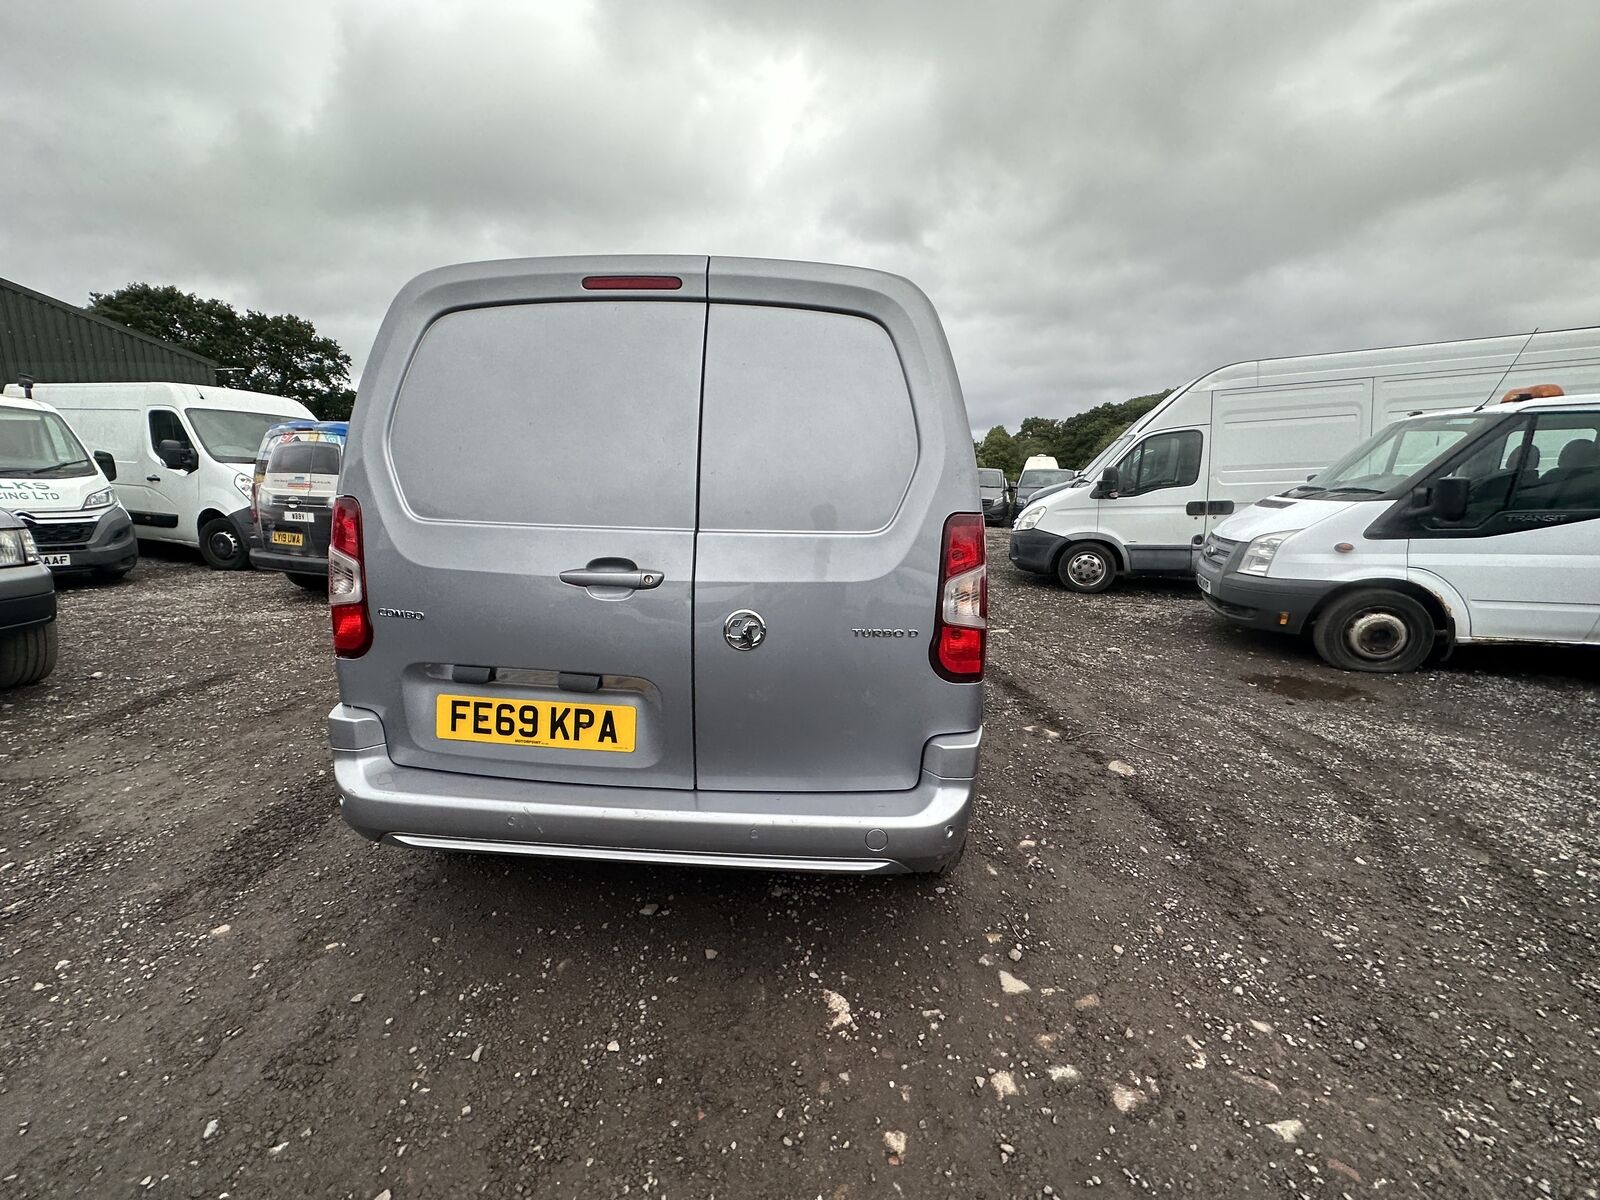 Bid on ONLY 54K MILES: 69 PLATE VAUXHALL COMBO SAGA (NO VAT ON HAMMER)- Buy &amp; Sell on Auction with EAMA Group